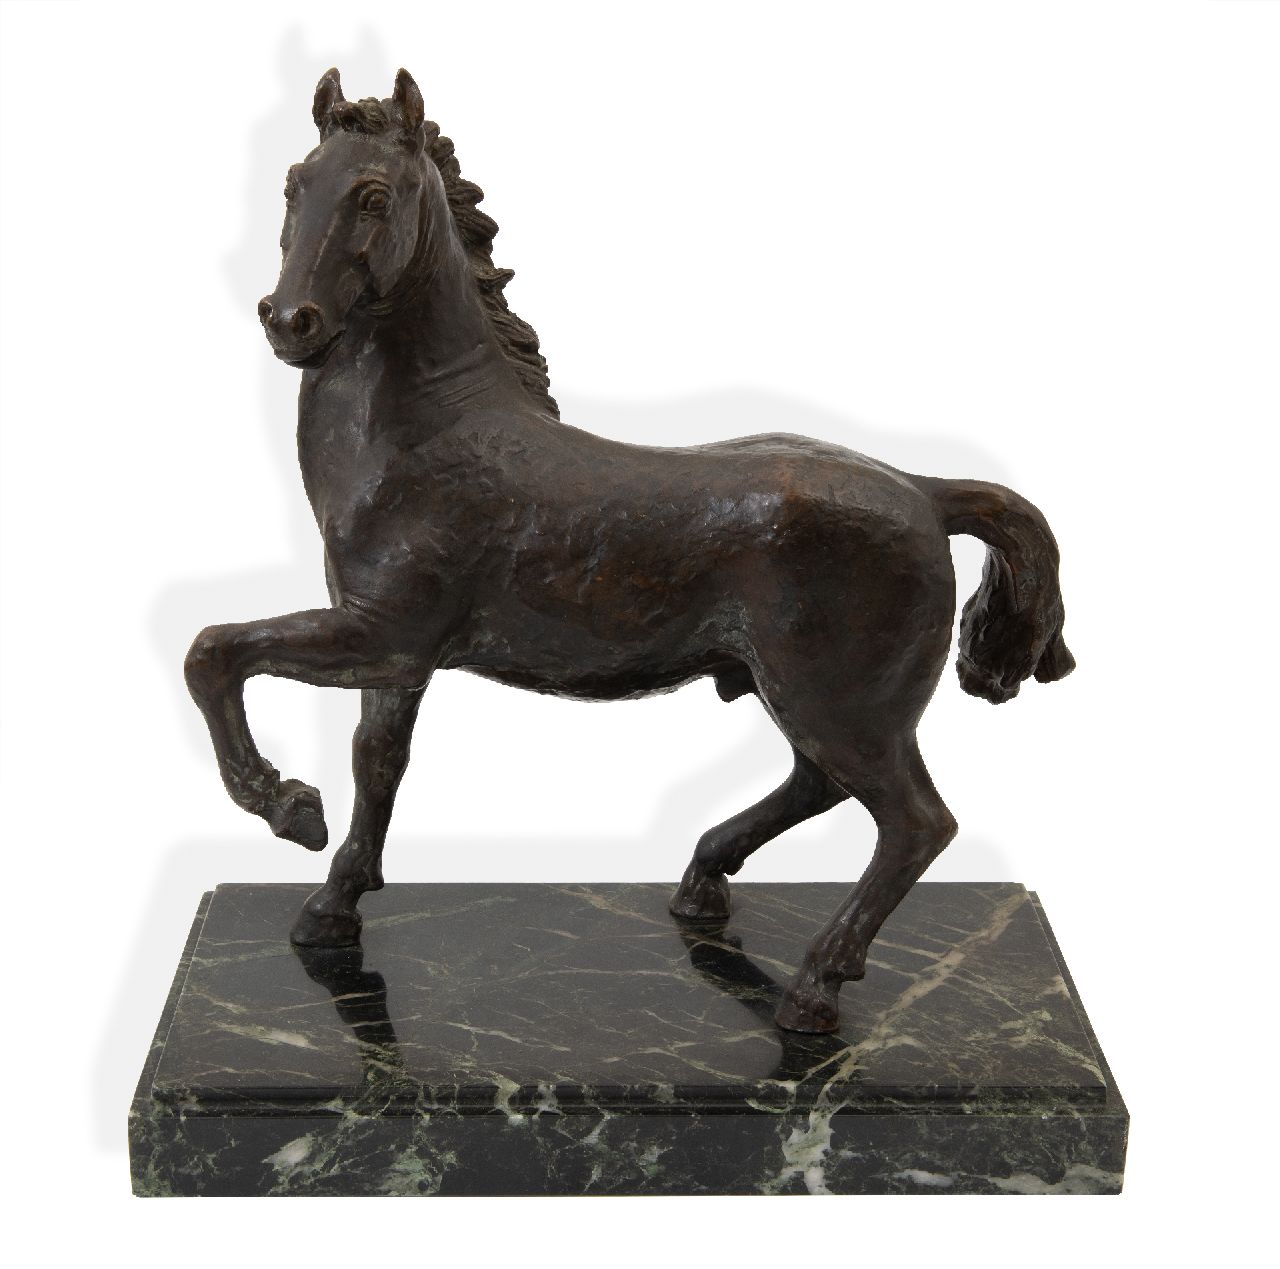 Duitse School   | Duitse School | Sculptures and objects offered for sale | A horse, patinated zinc 44.0 x 37.5 cm